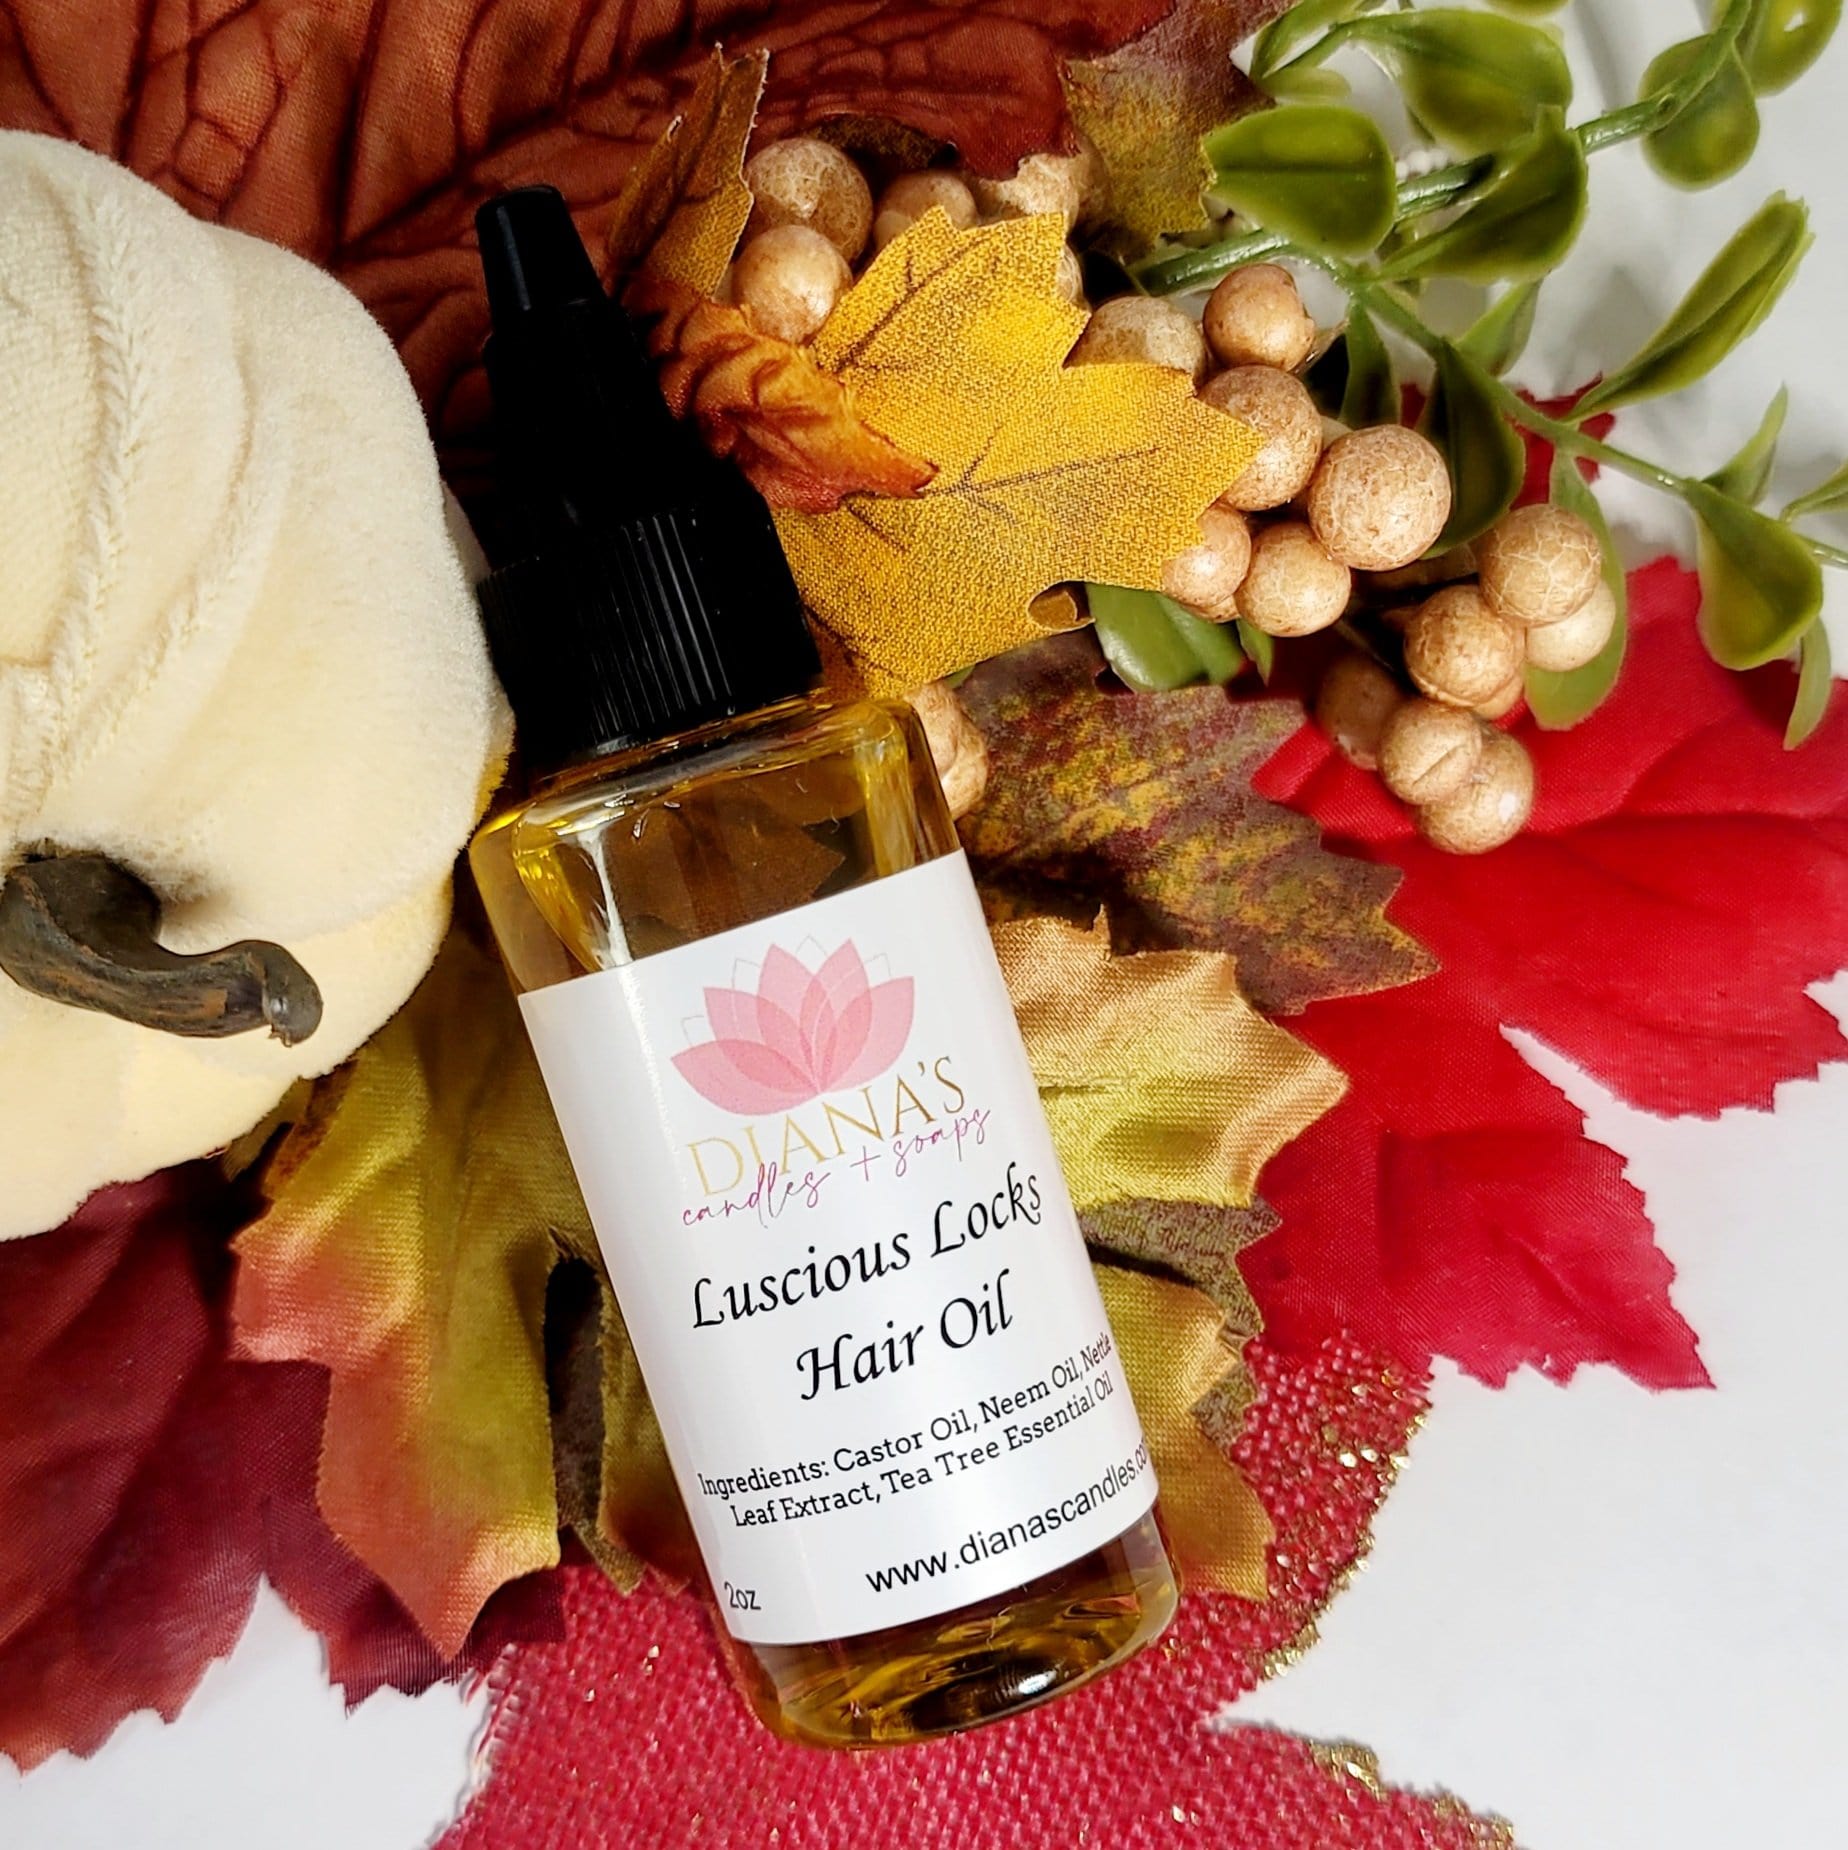 Luscious Locks Hair Oil - Diana's Candles and Soaps 